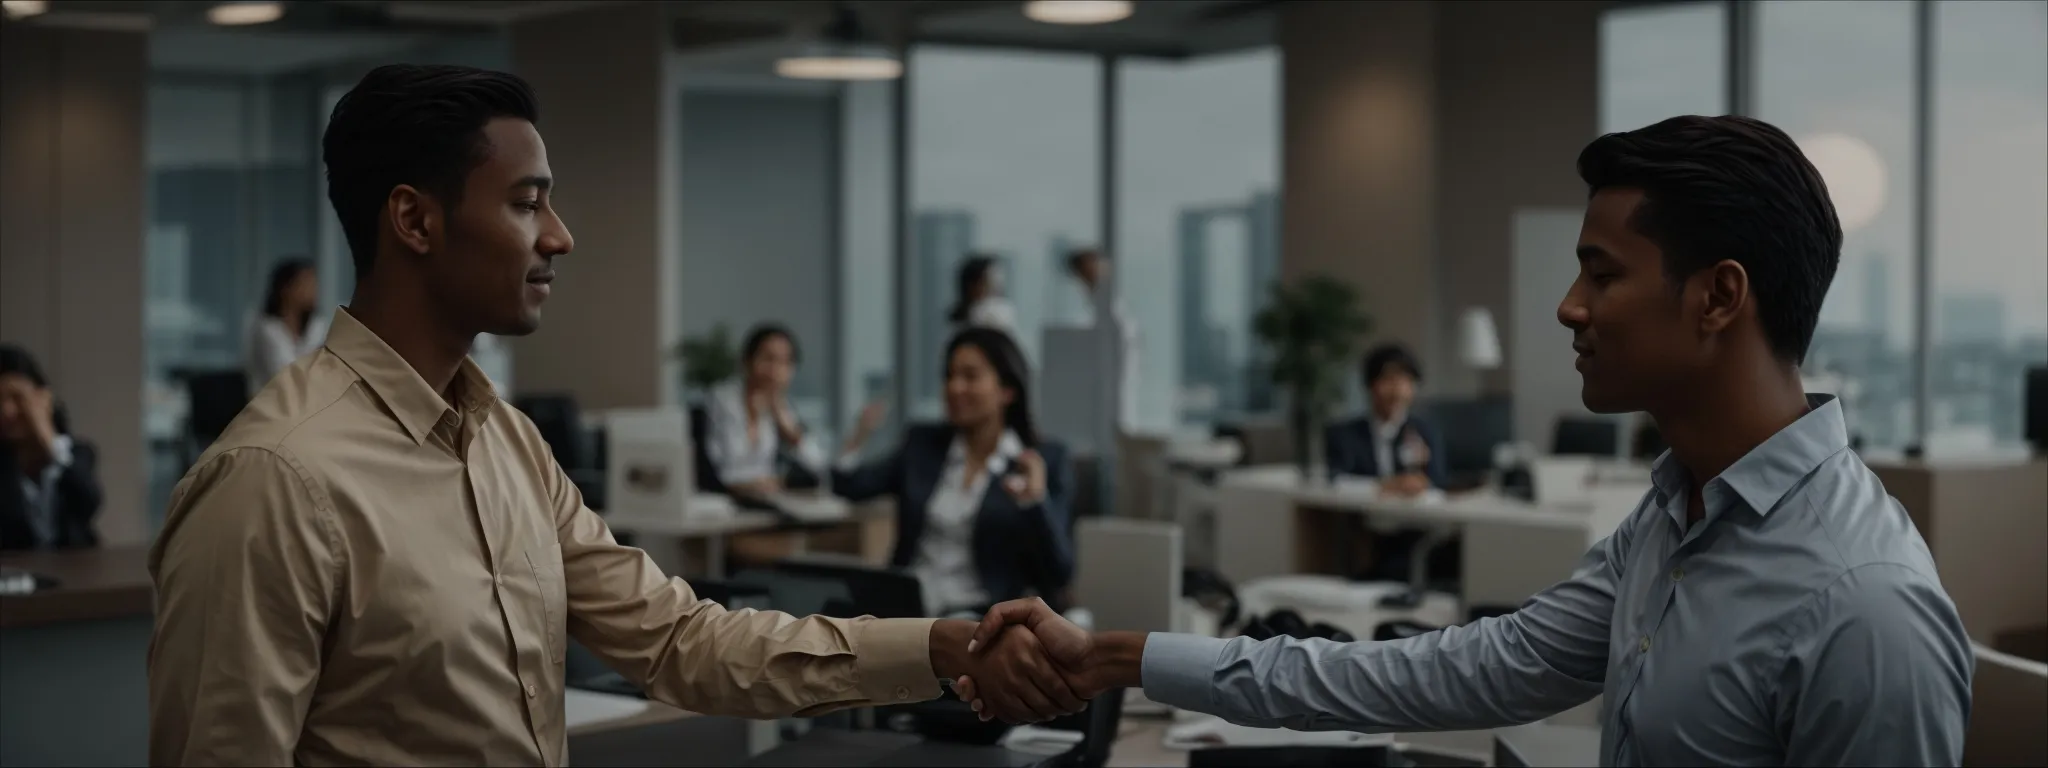 two professionals shaking hands in a modern office setting, symbolizing a successful interview agreement.